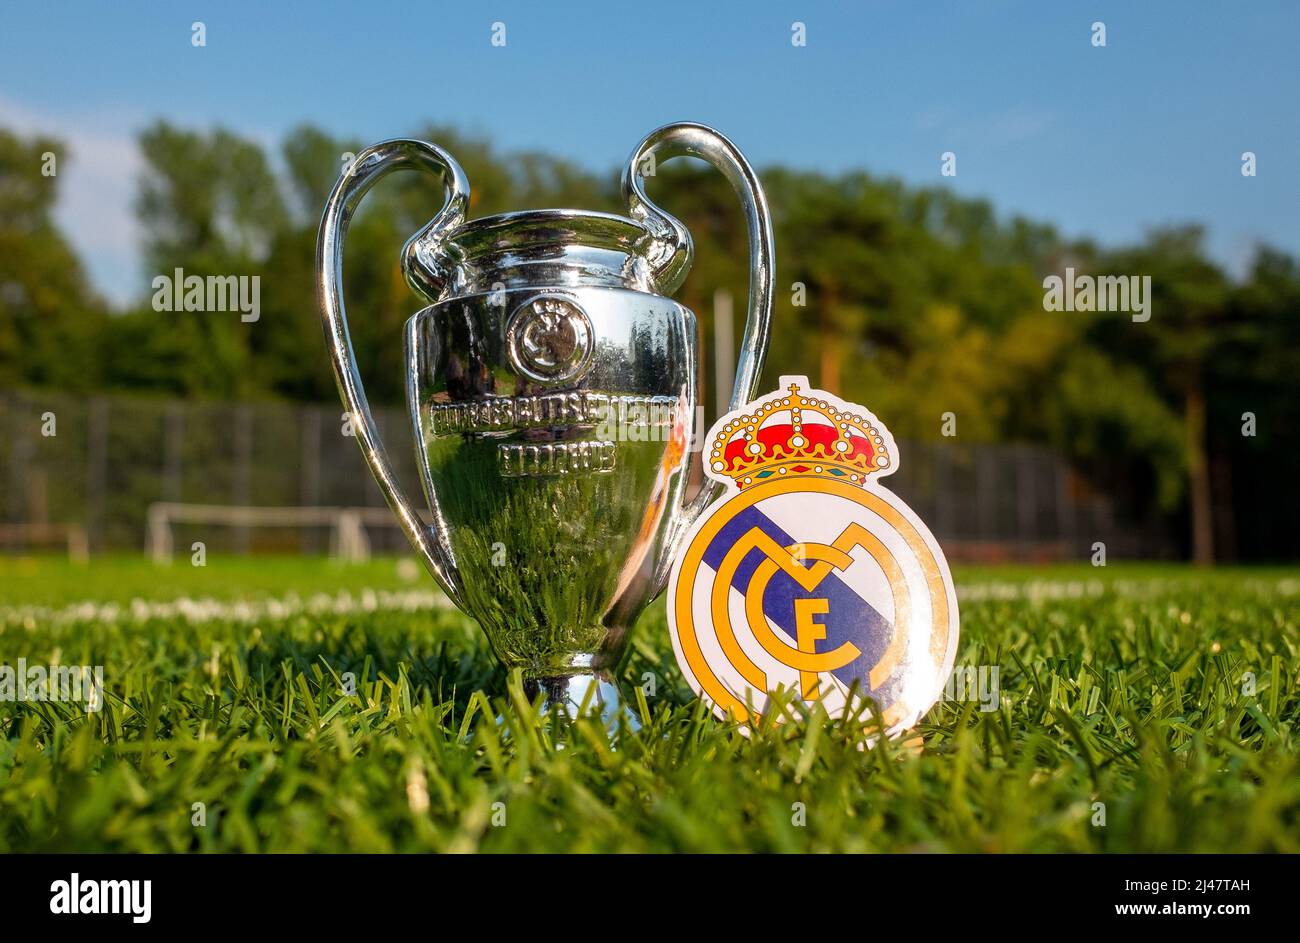 August 30, 2021, Madrid, Spain. The emblem of the football Real Madrid CF and the UEFA Champions League Cup on the green turf of the stadium. Stock Photo